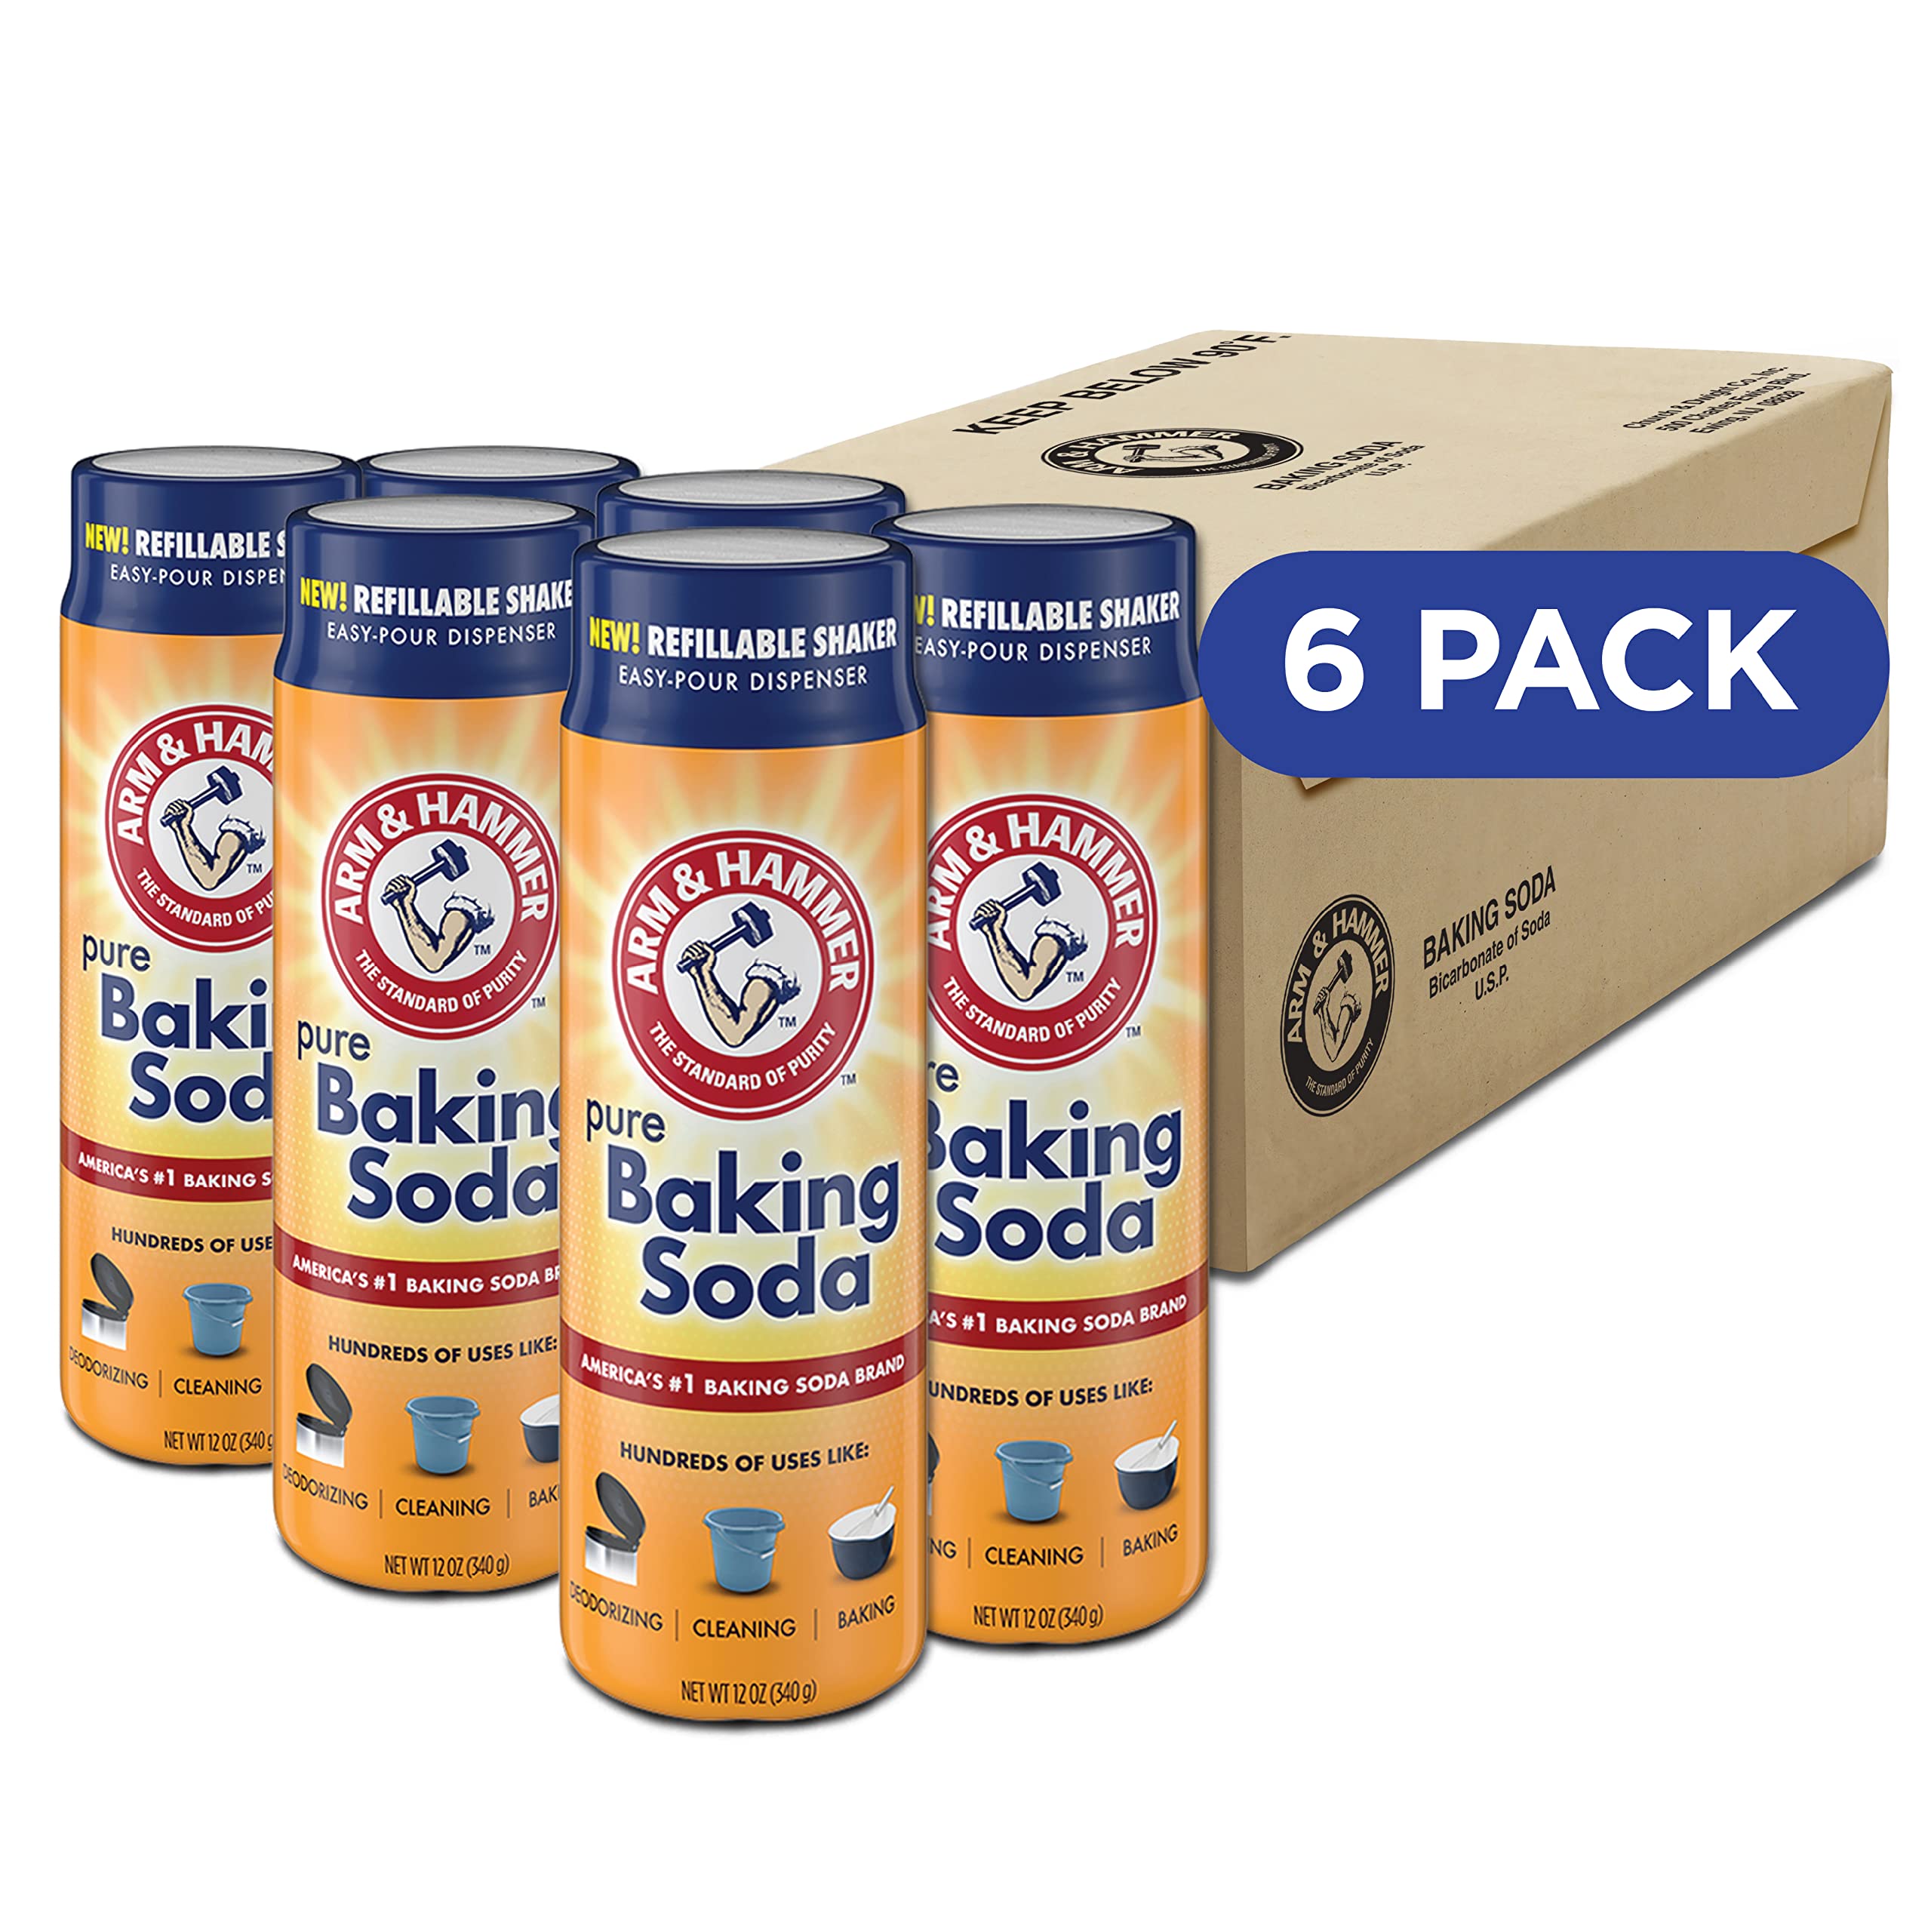 6-Pack 12-Oz Arm & Hammer Baking Soda Shaker $11.34 w/ S&S + Free Shipping w/ Prime or on orders over $25